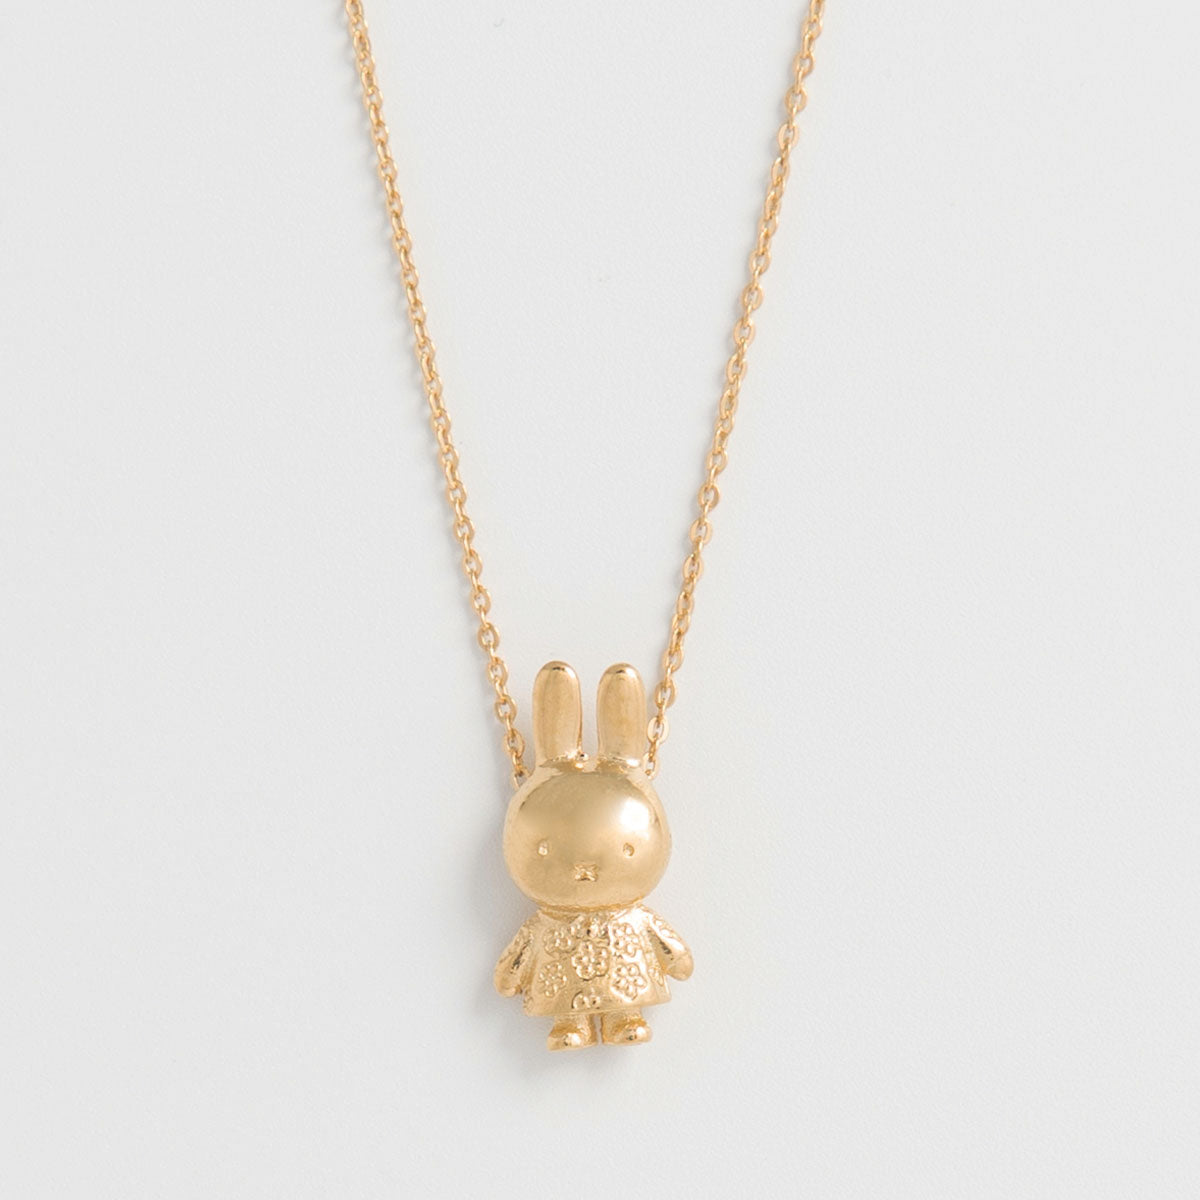 Handcrafted 18ct gold vermeil necklace featuring a Miffy flower charm with daisies. The pendant slides freely on a silver chain with a spring clasp closure. 